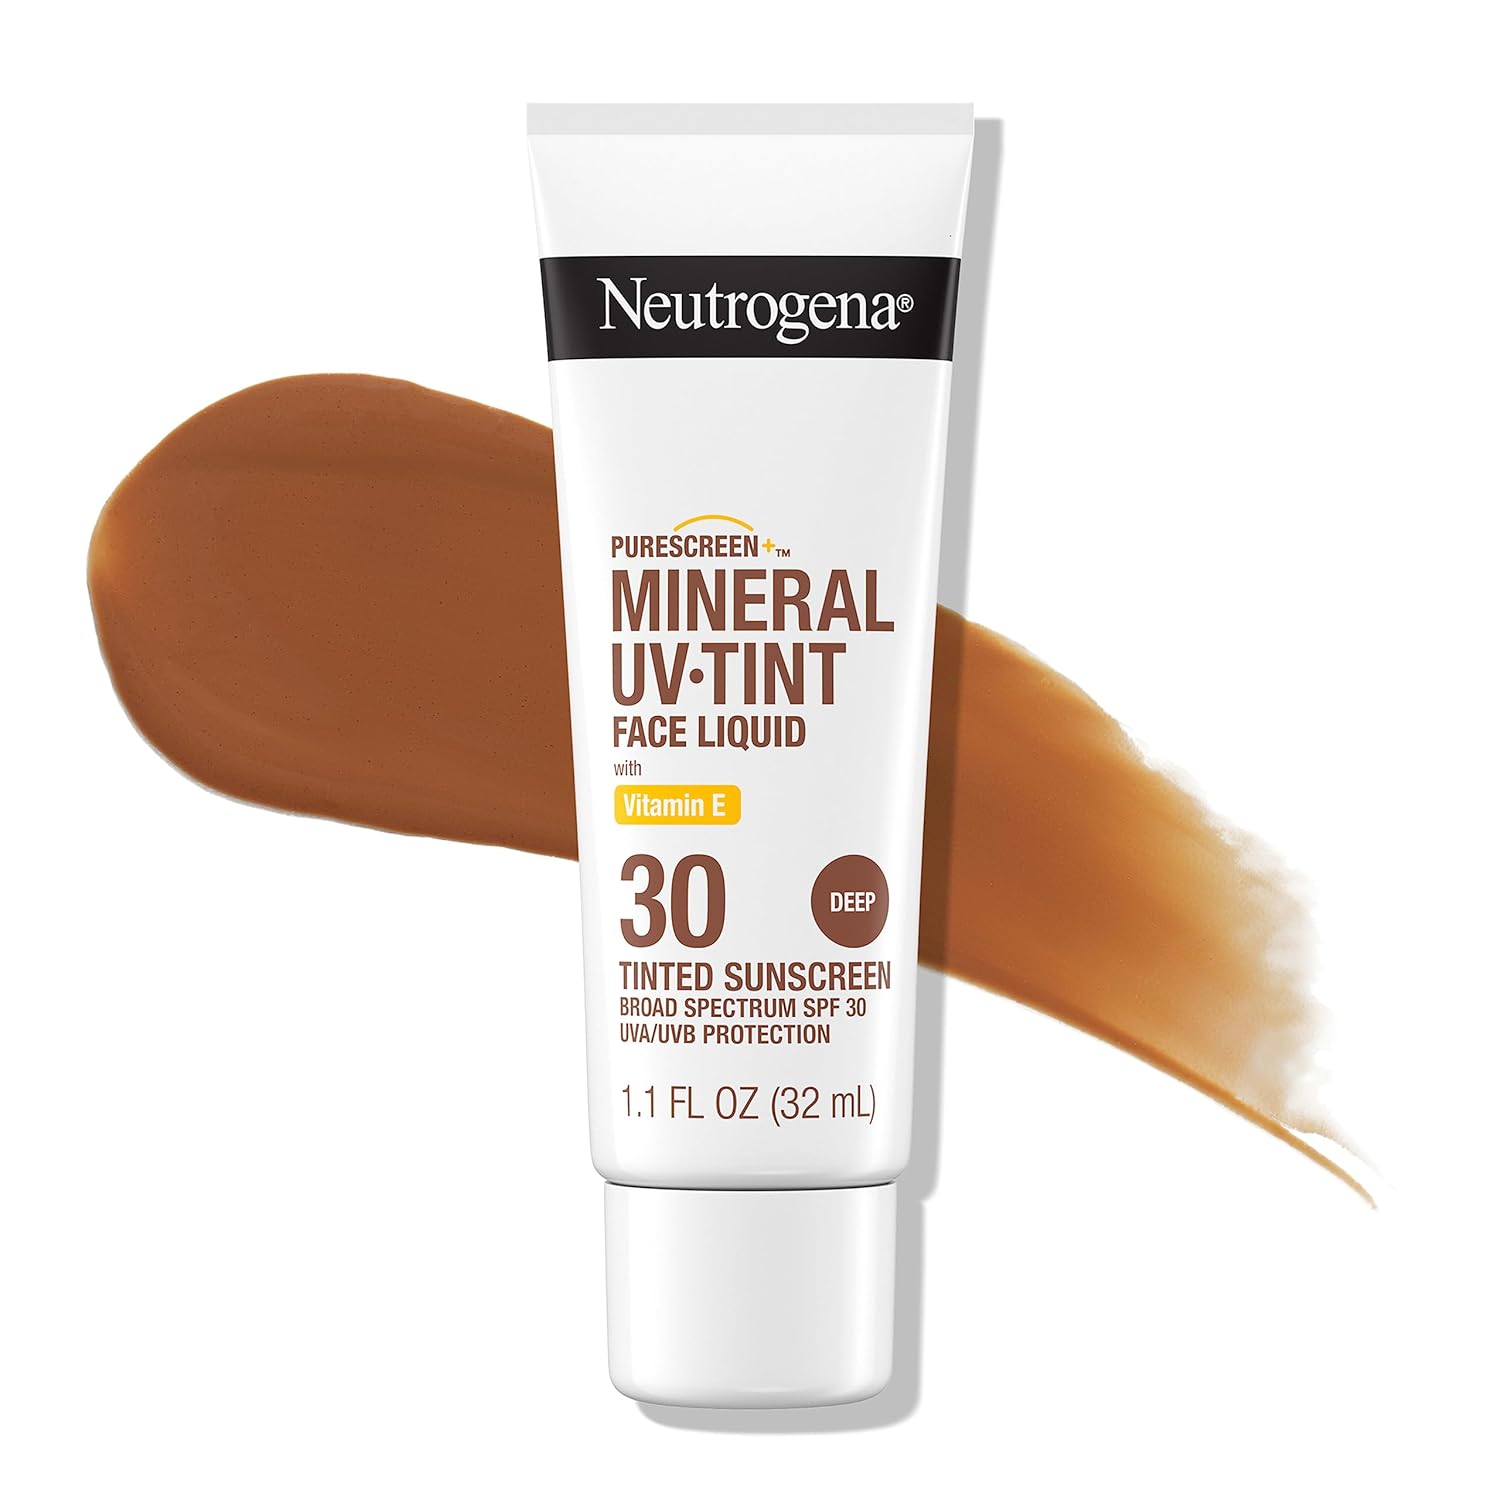 Neutrogena Purescreen+ Tinted Sunscreen for Face with SPF 30, Broad Spectrum Mineral Sunscreen with Zinc Oxide and Vitamin E, Water Resistant, Fragrance Free, Deep, 1.1 fl oz